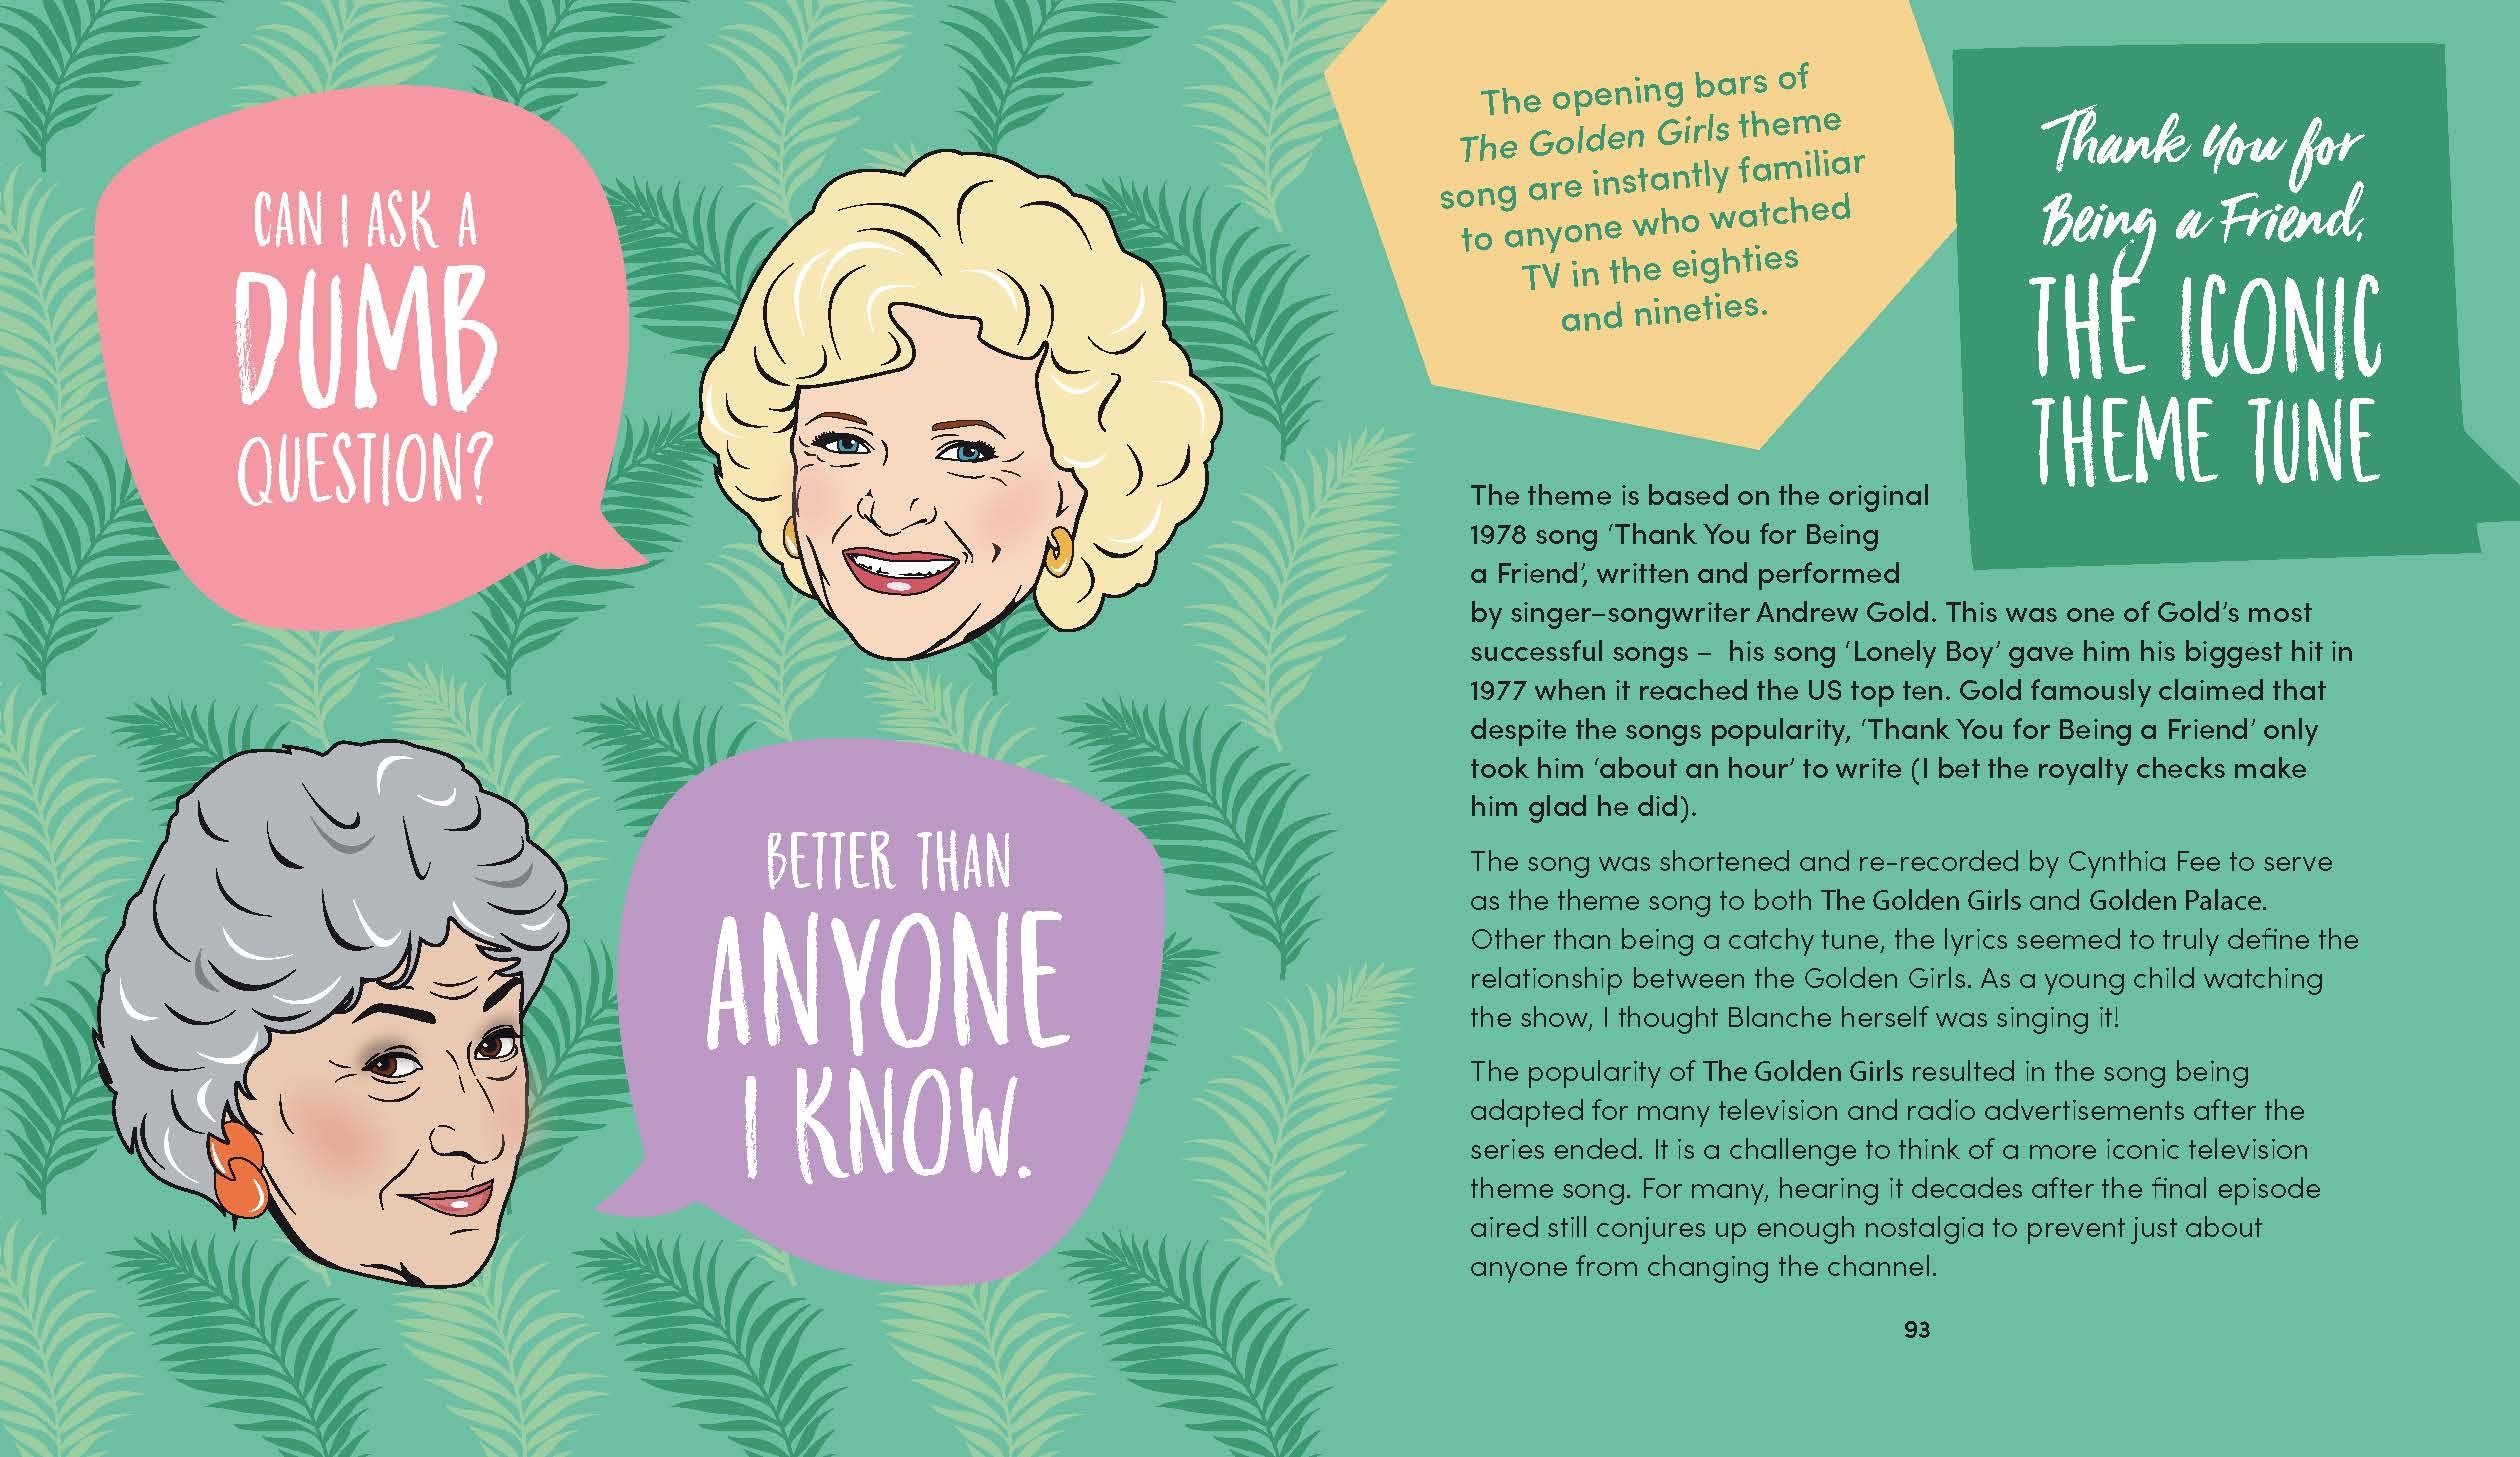 Thank You for Being a Friend: Life According to The Golden Girls